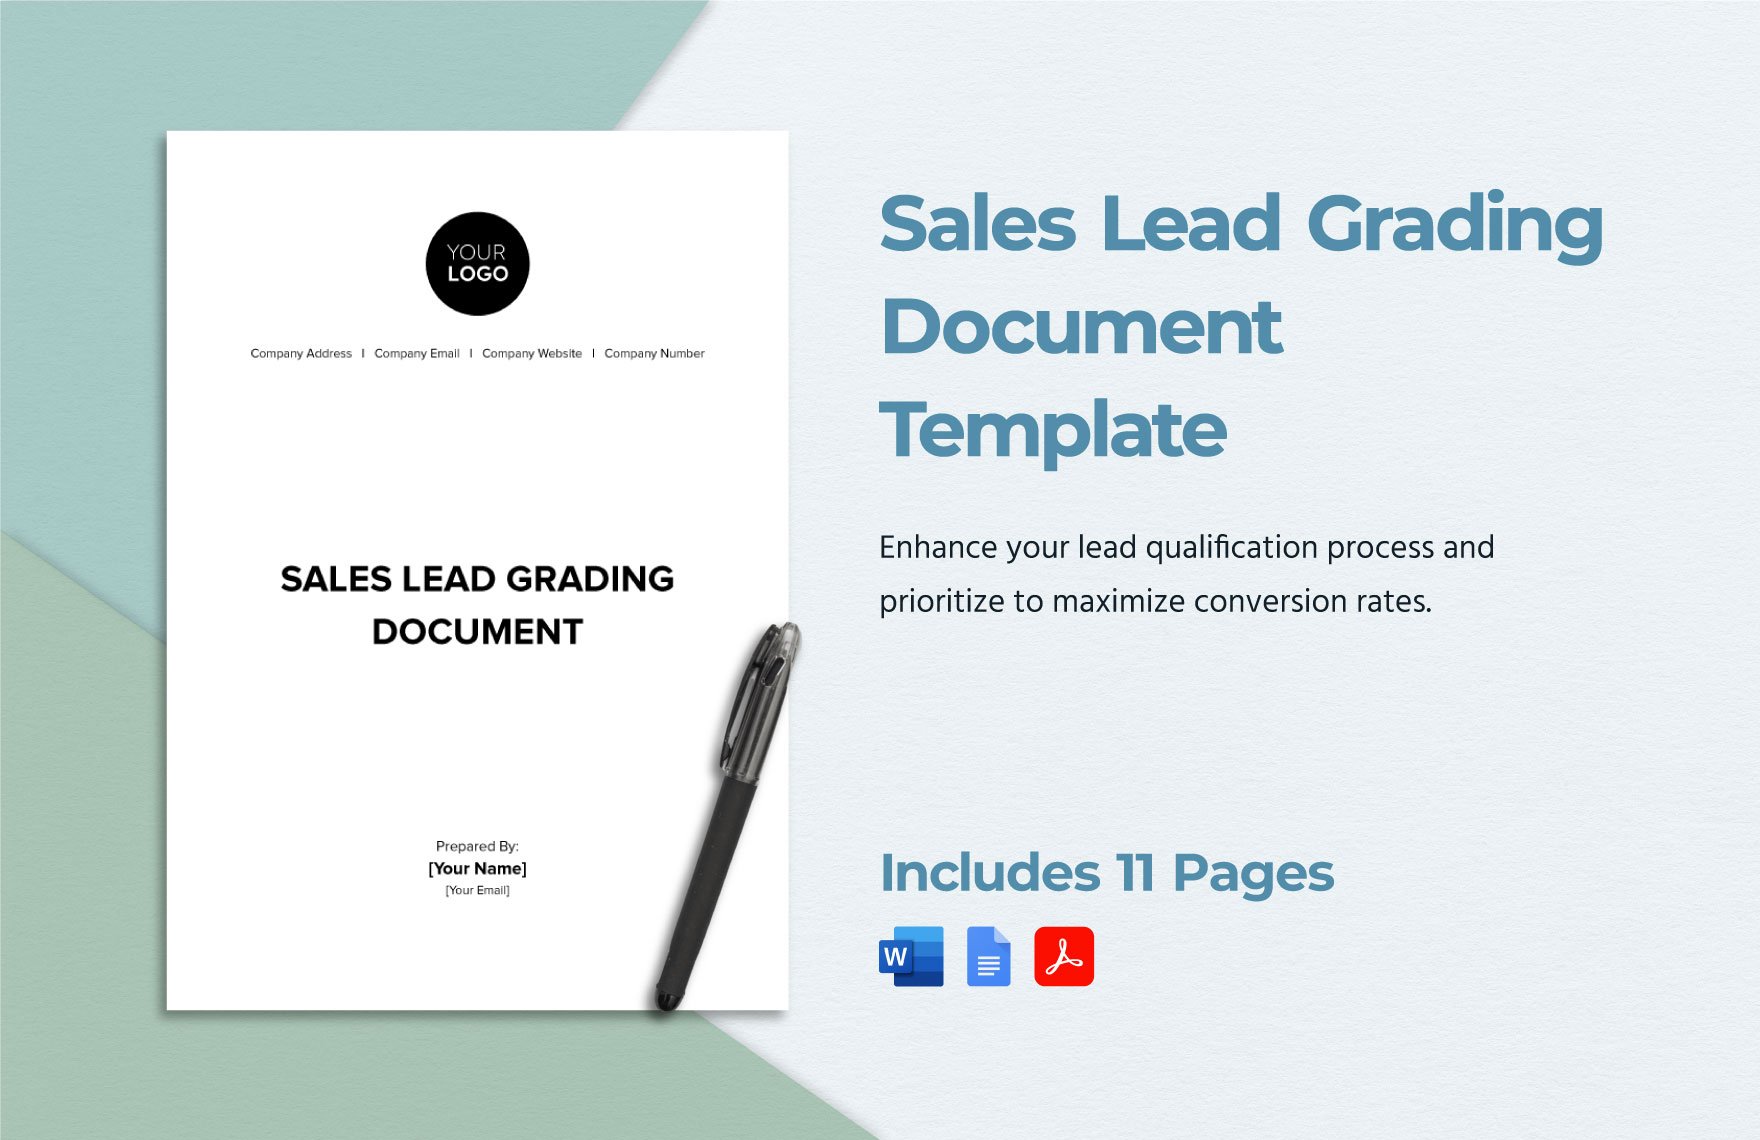 Sales Lead Grading Document Template in Word, Google Docs, PDF